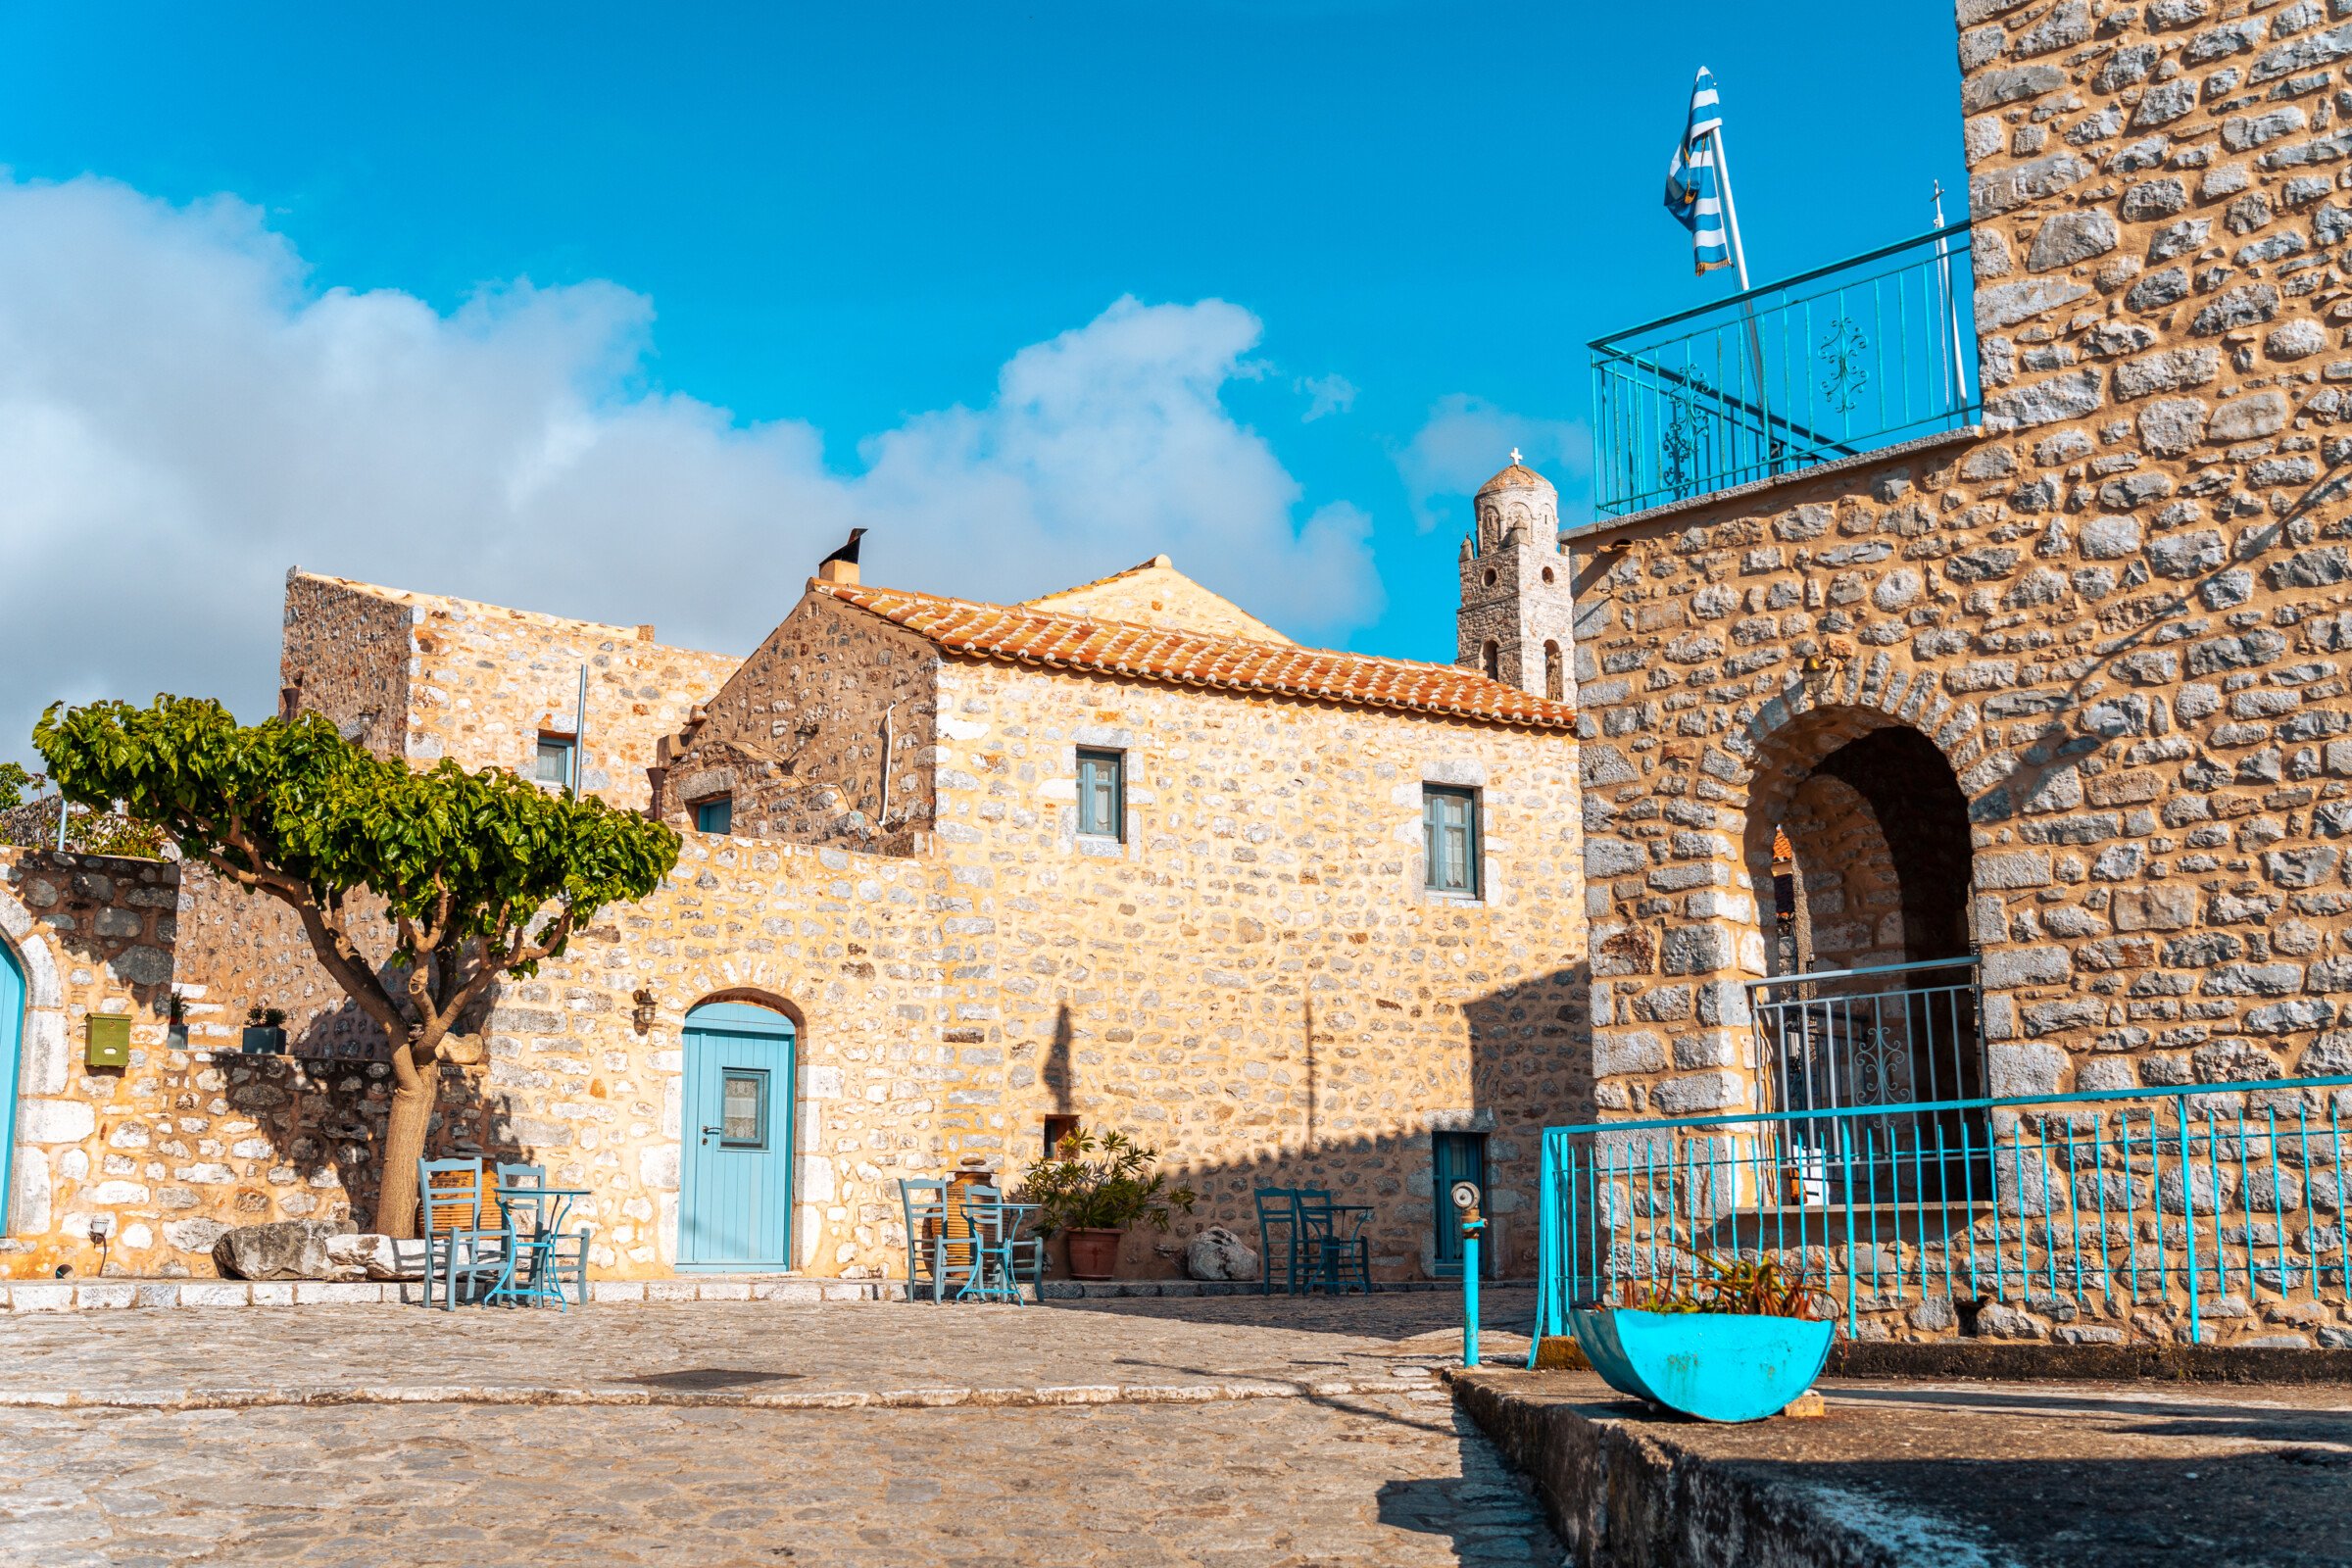 This image shows a peaceful square lined with stone buildings with sky blue shutters in Areopoli. 